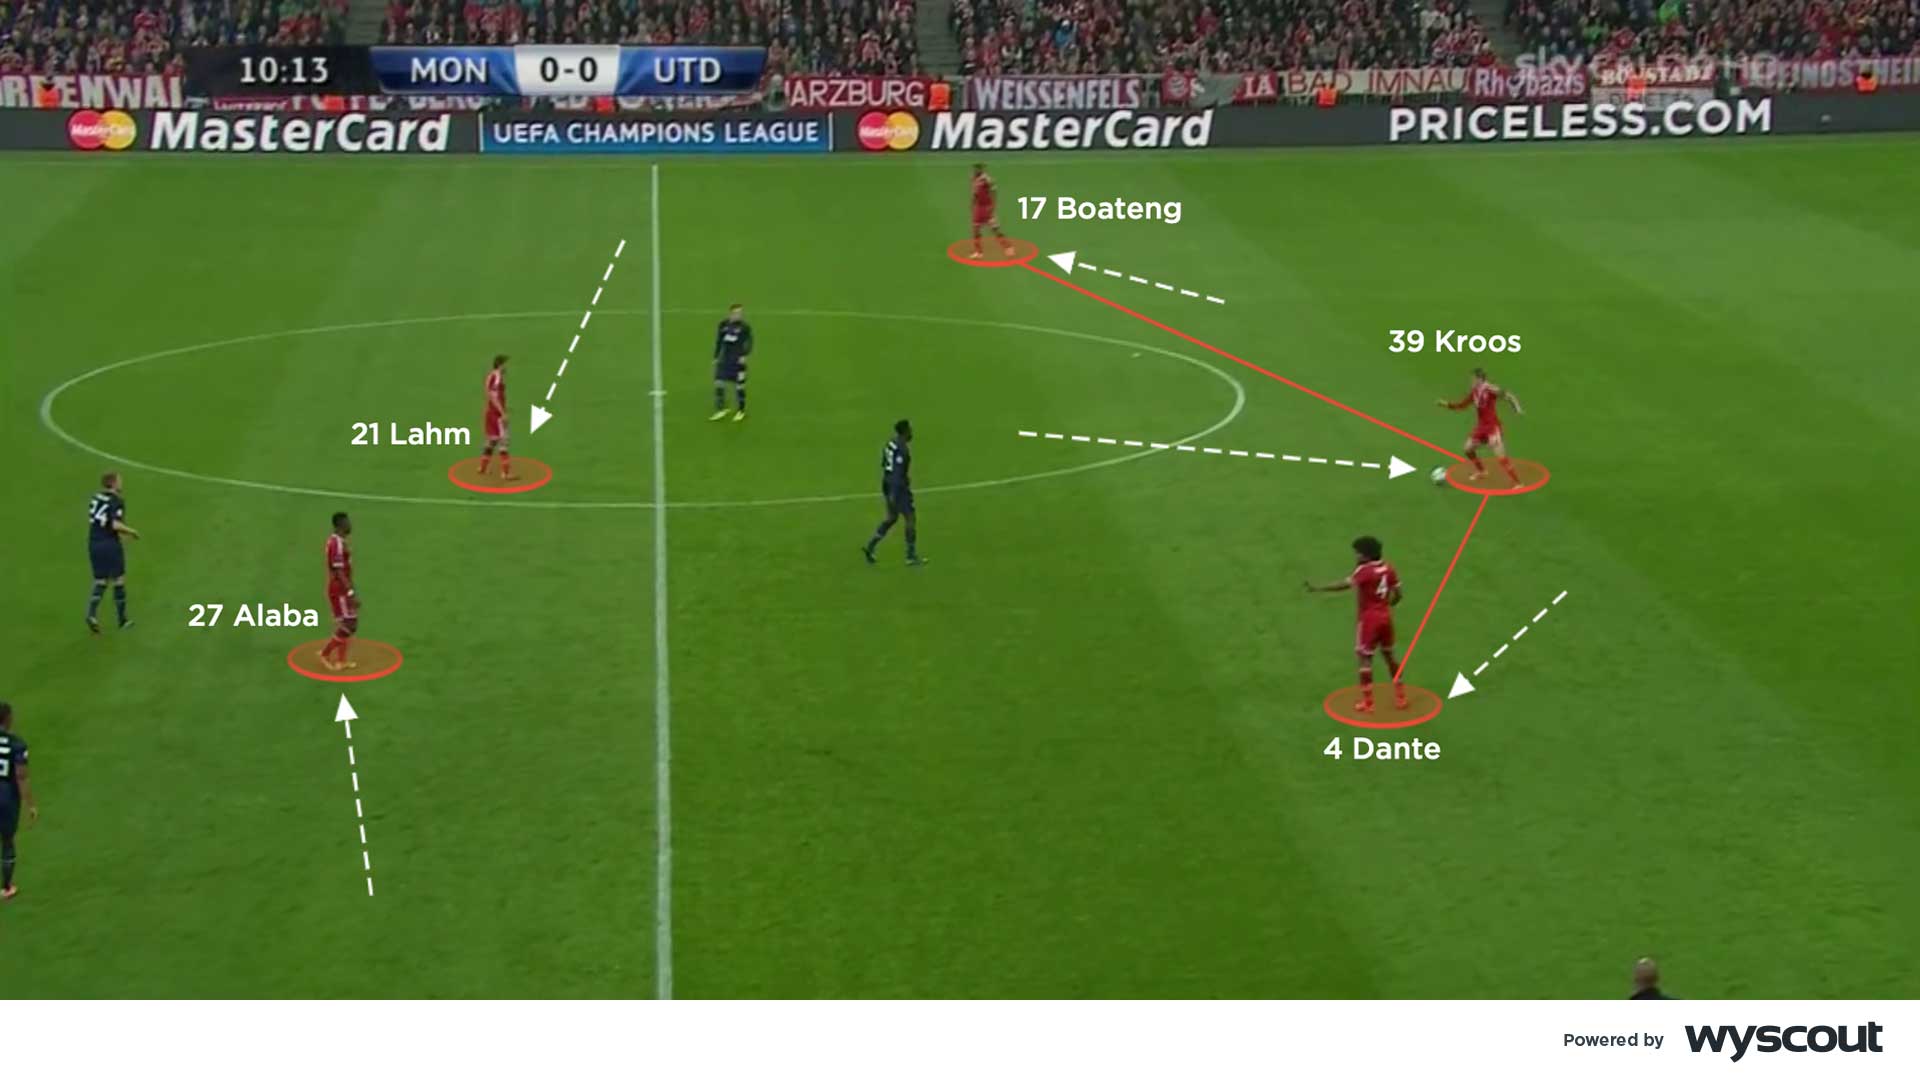 Recreate Pep Guardiola's tactics with the inverted full-back in